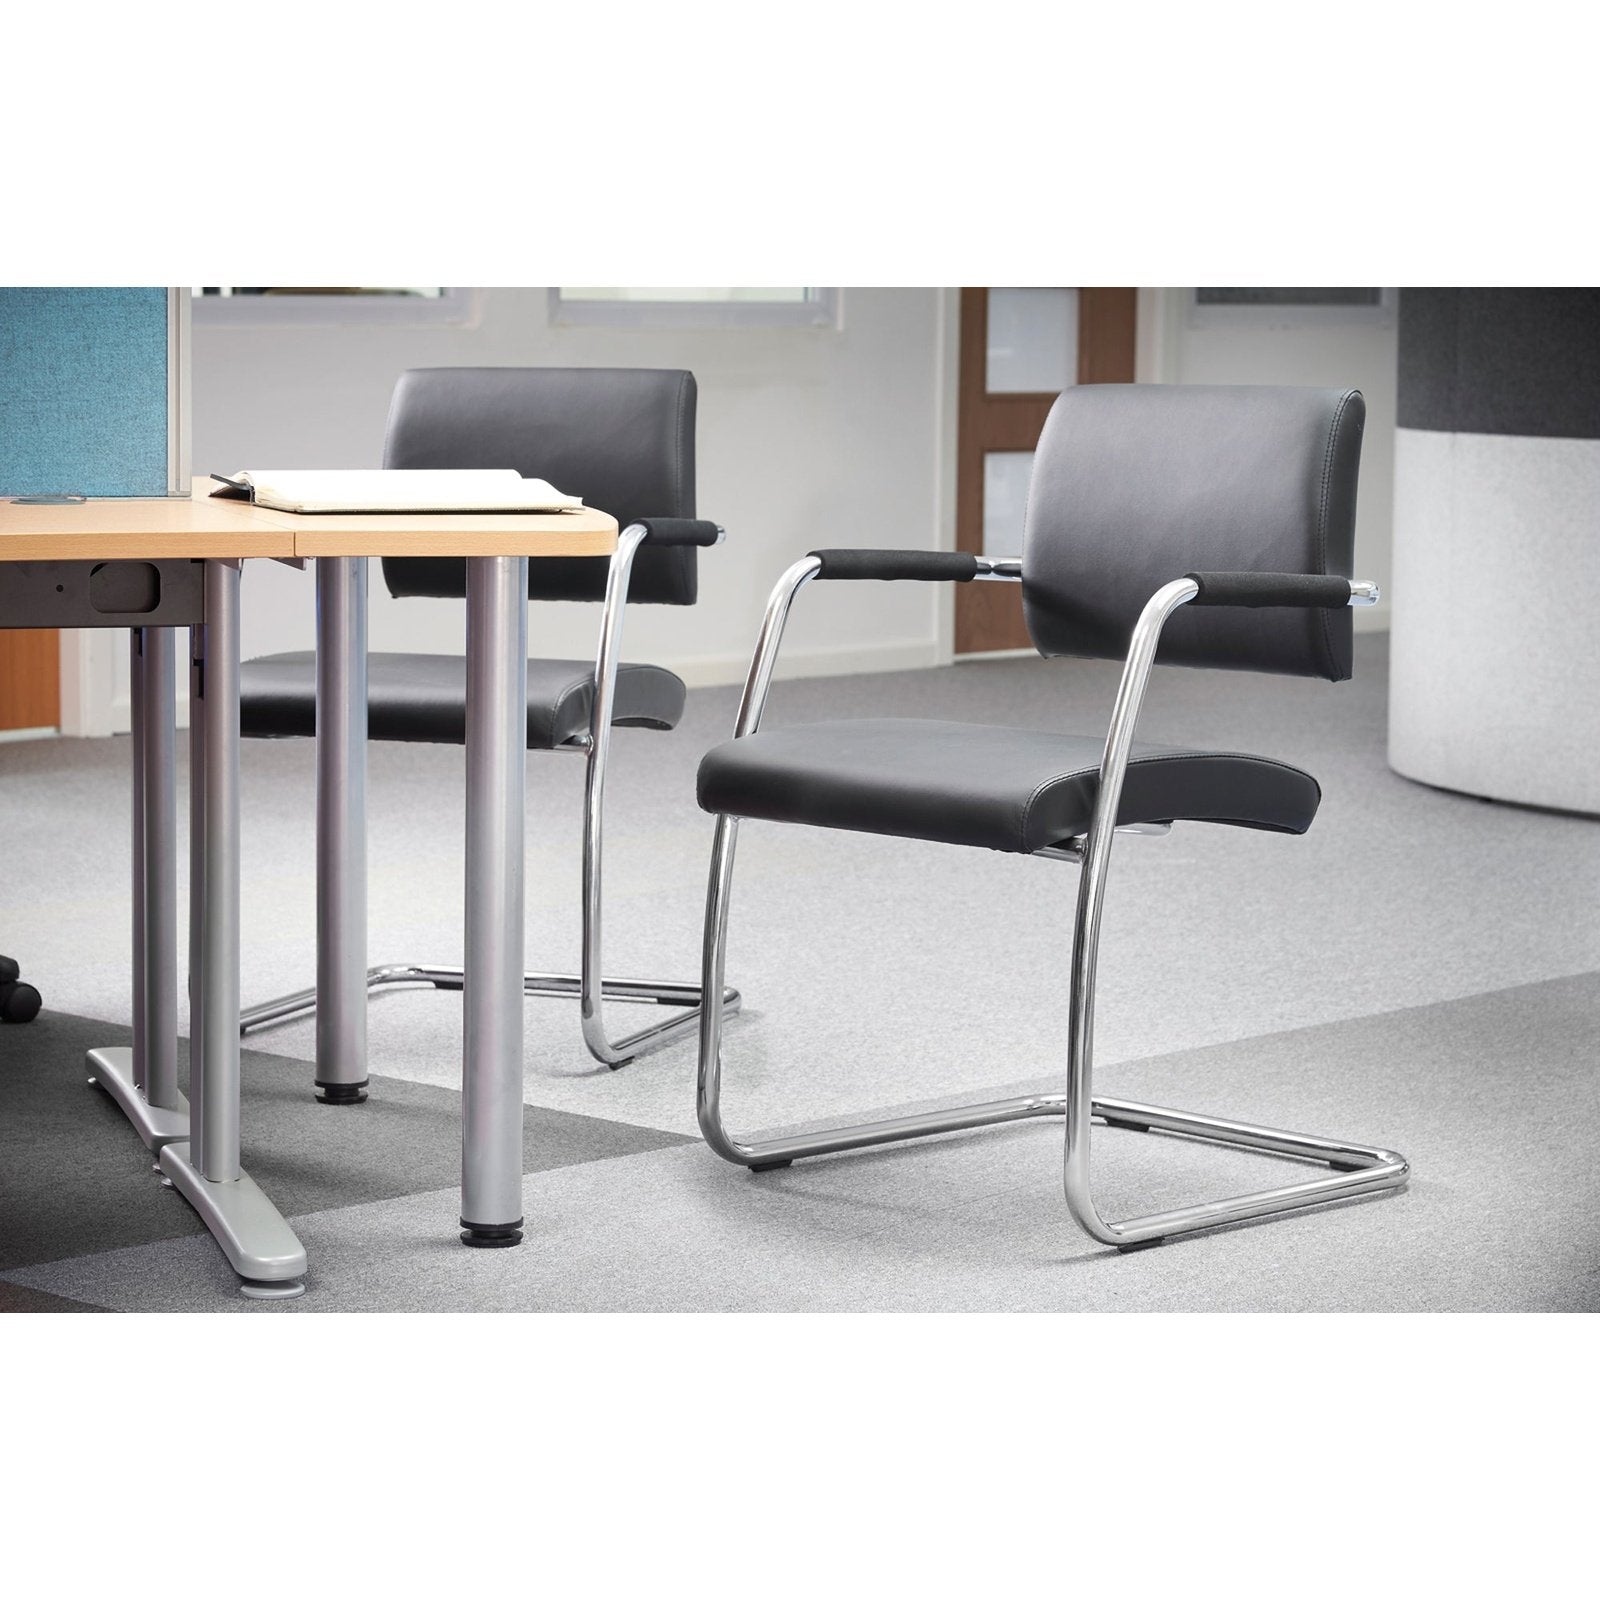 Bruges meeting room cantilever chair pack of 2 - black faux leather - Office Products Online